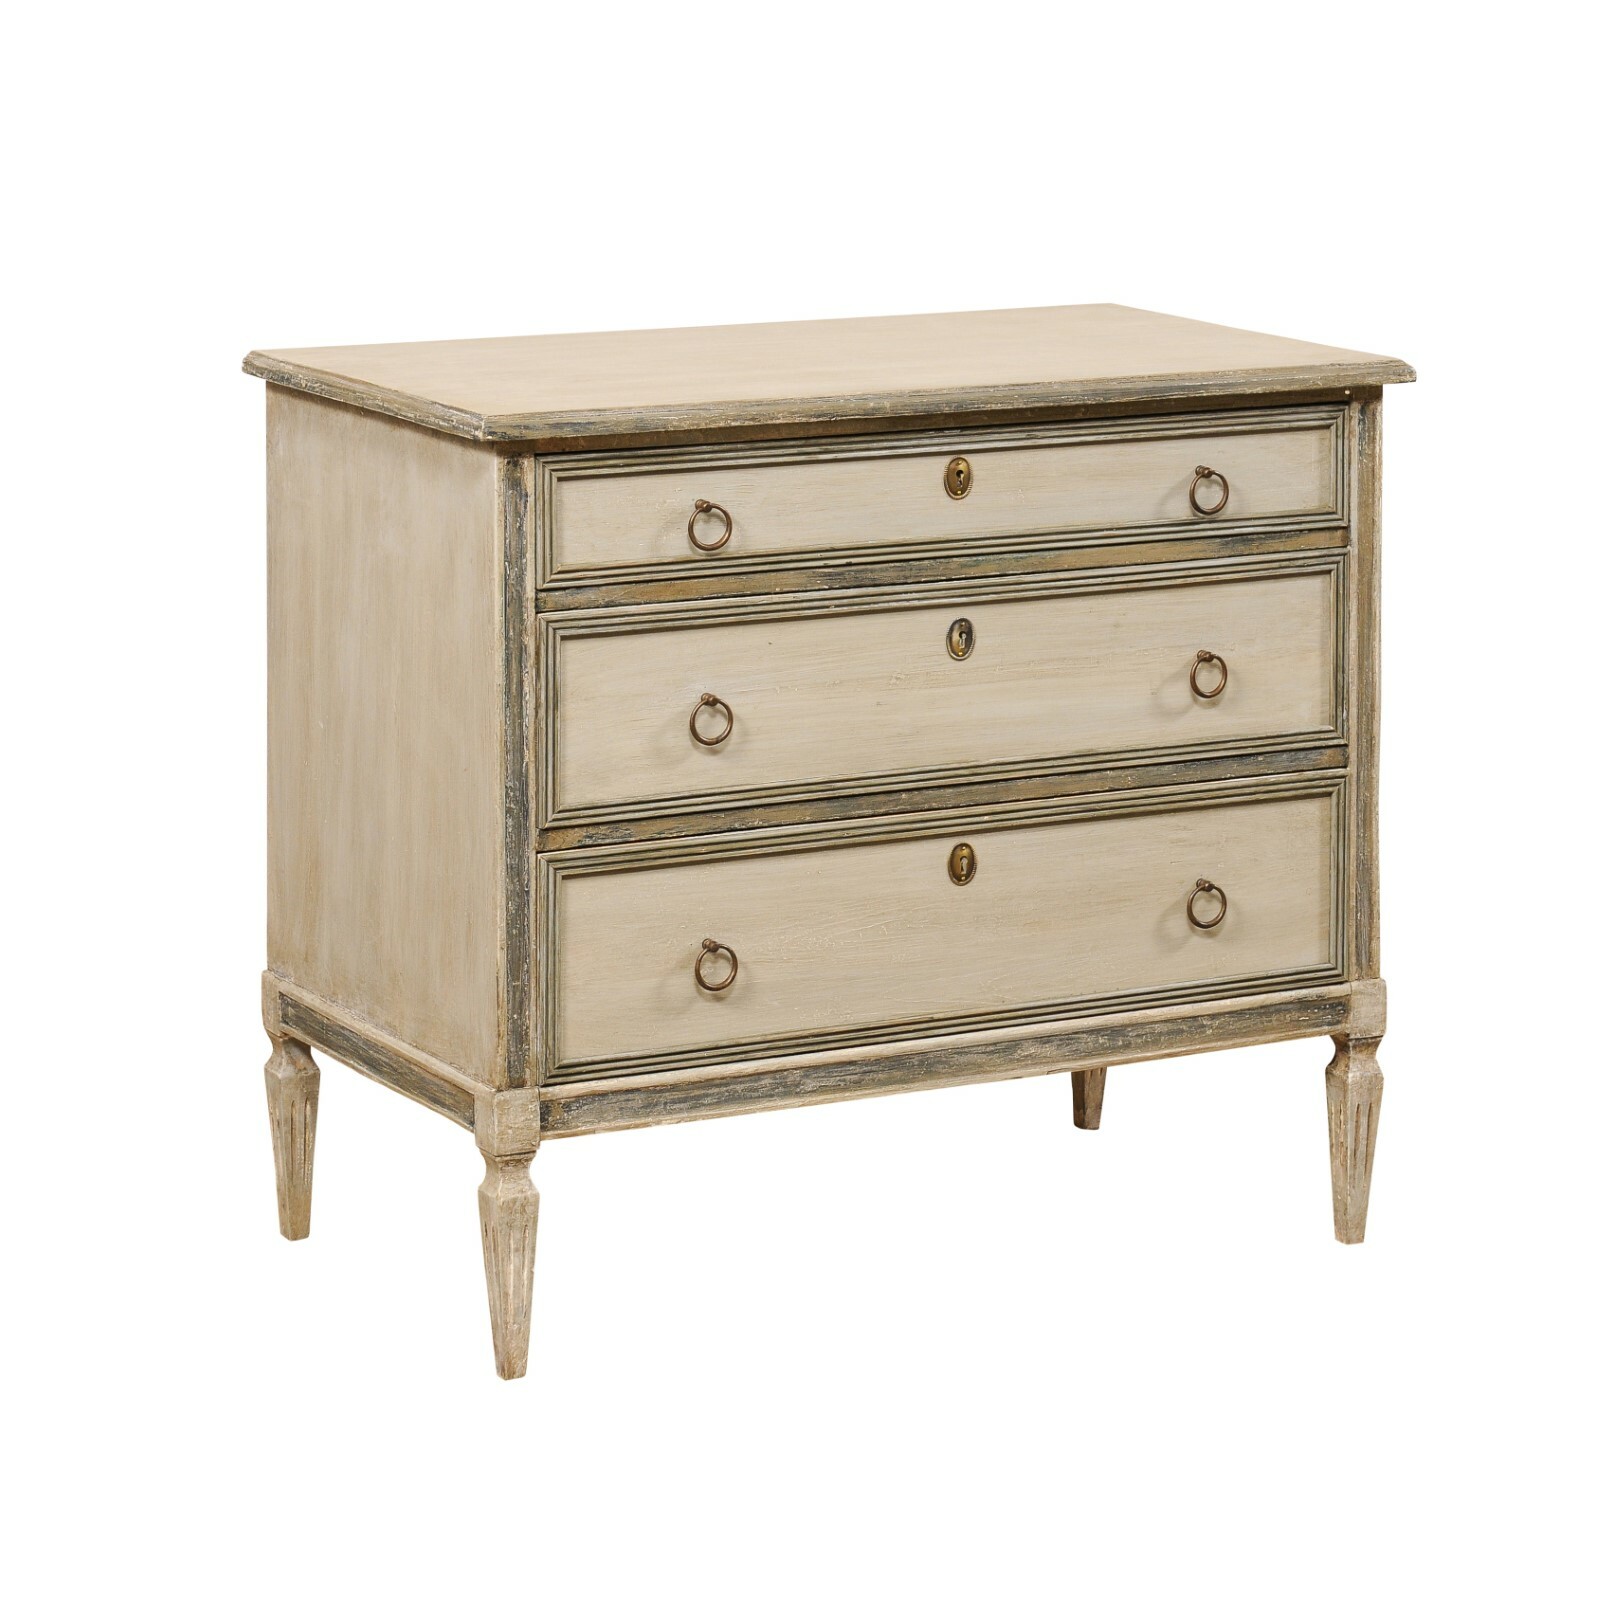 Swedish Gustavian Style Painted Wood Chest